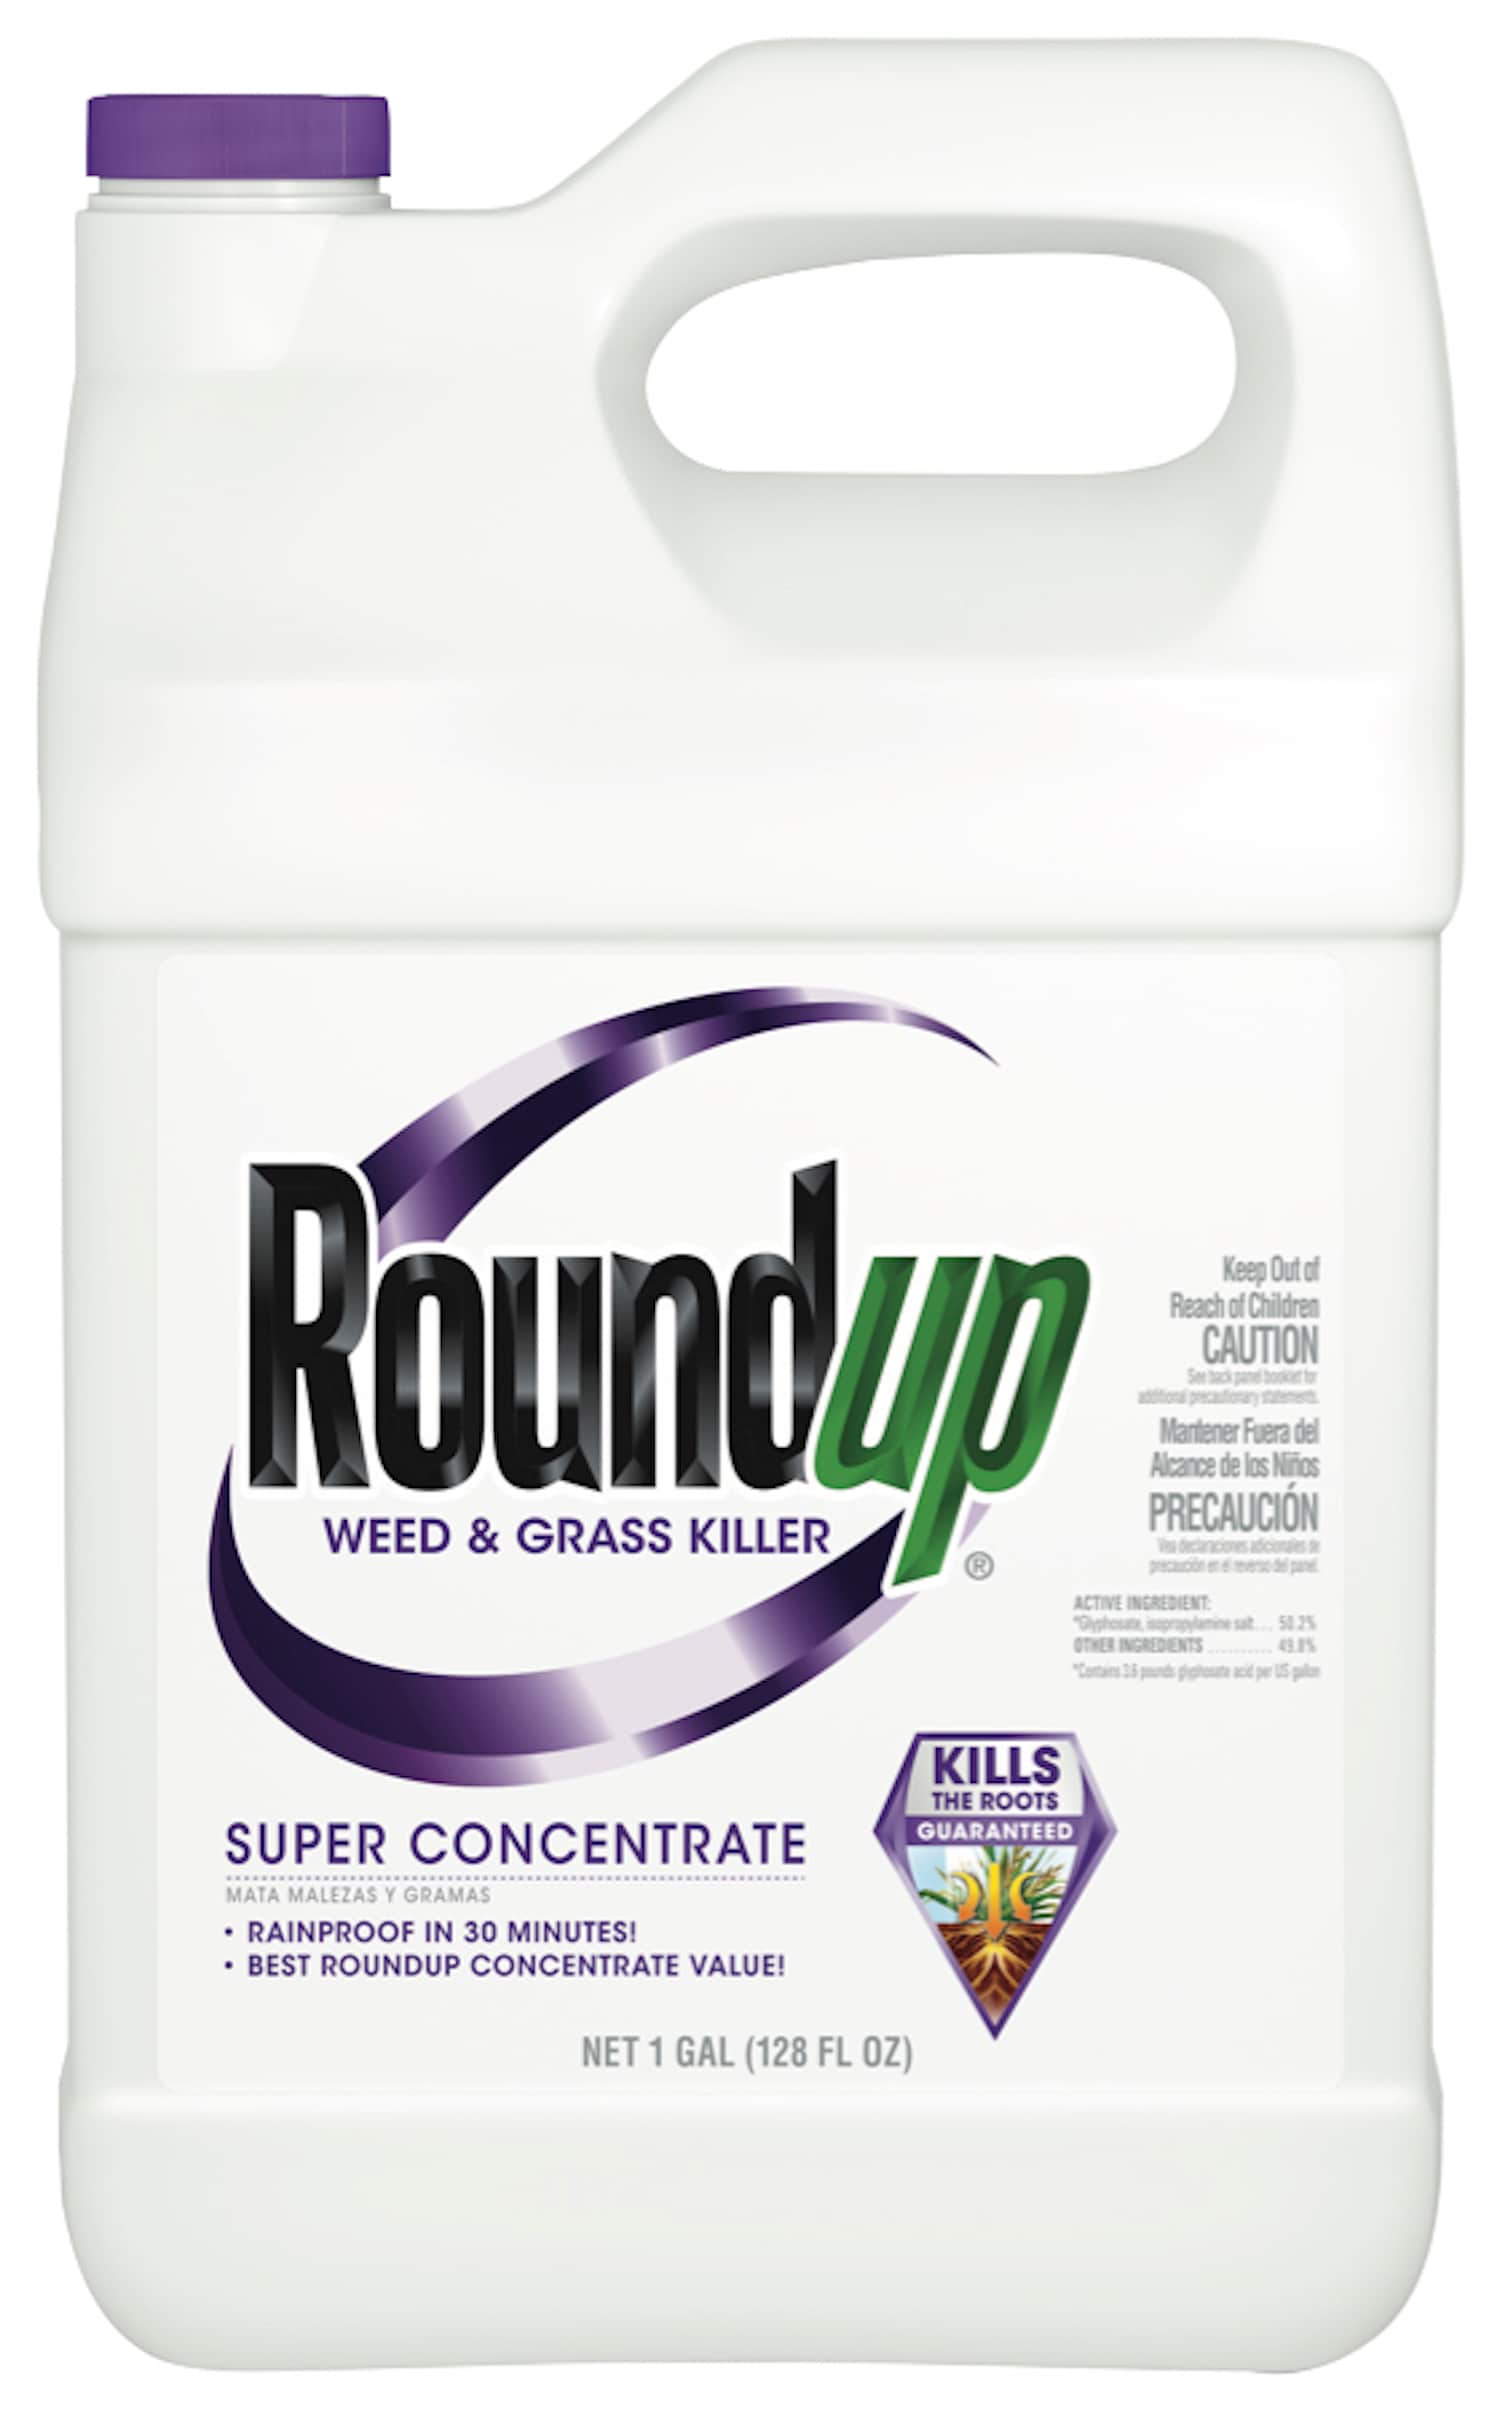 RoundUp: World's most popular weed-killer linked to convulsions in animals  for first time